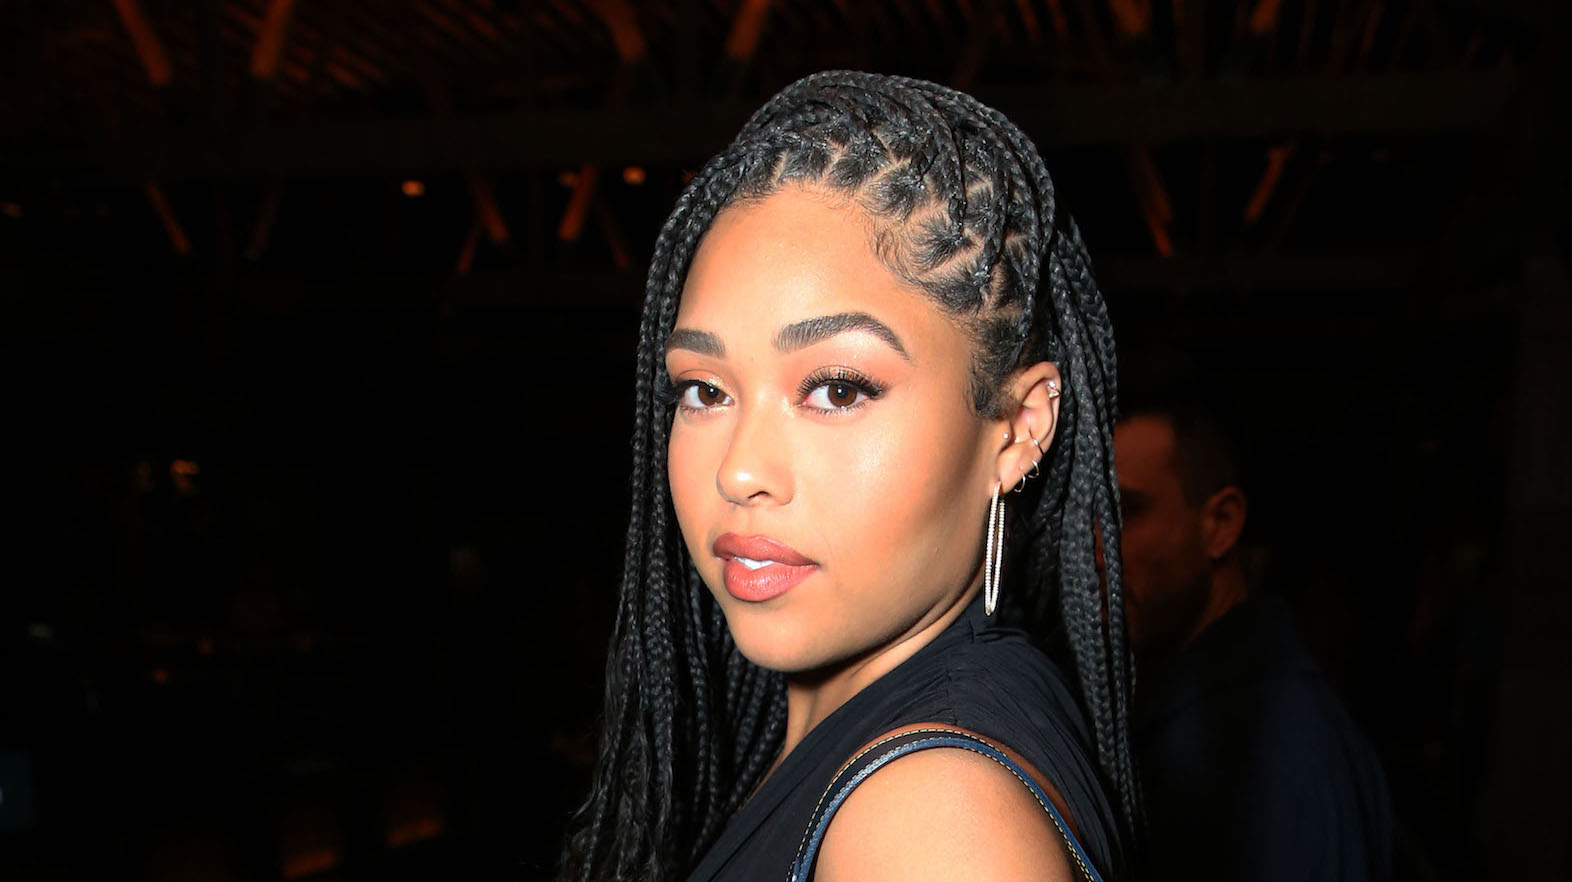 Jordyn Woods 'Walked in Confidently' to Post-Scandal Outing